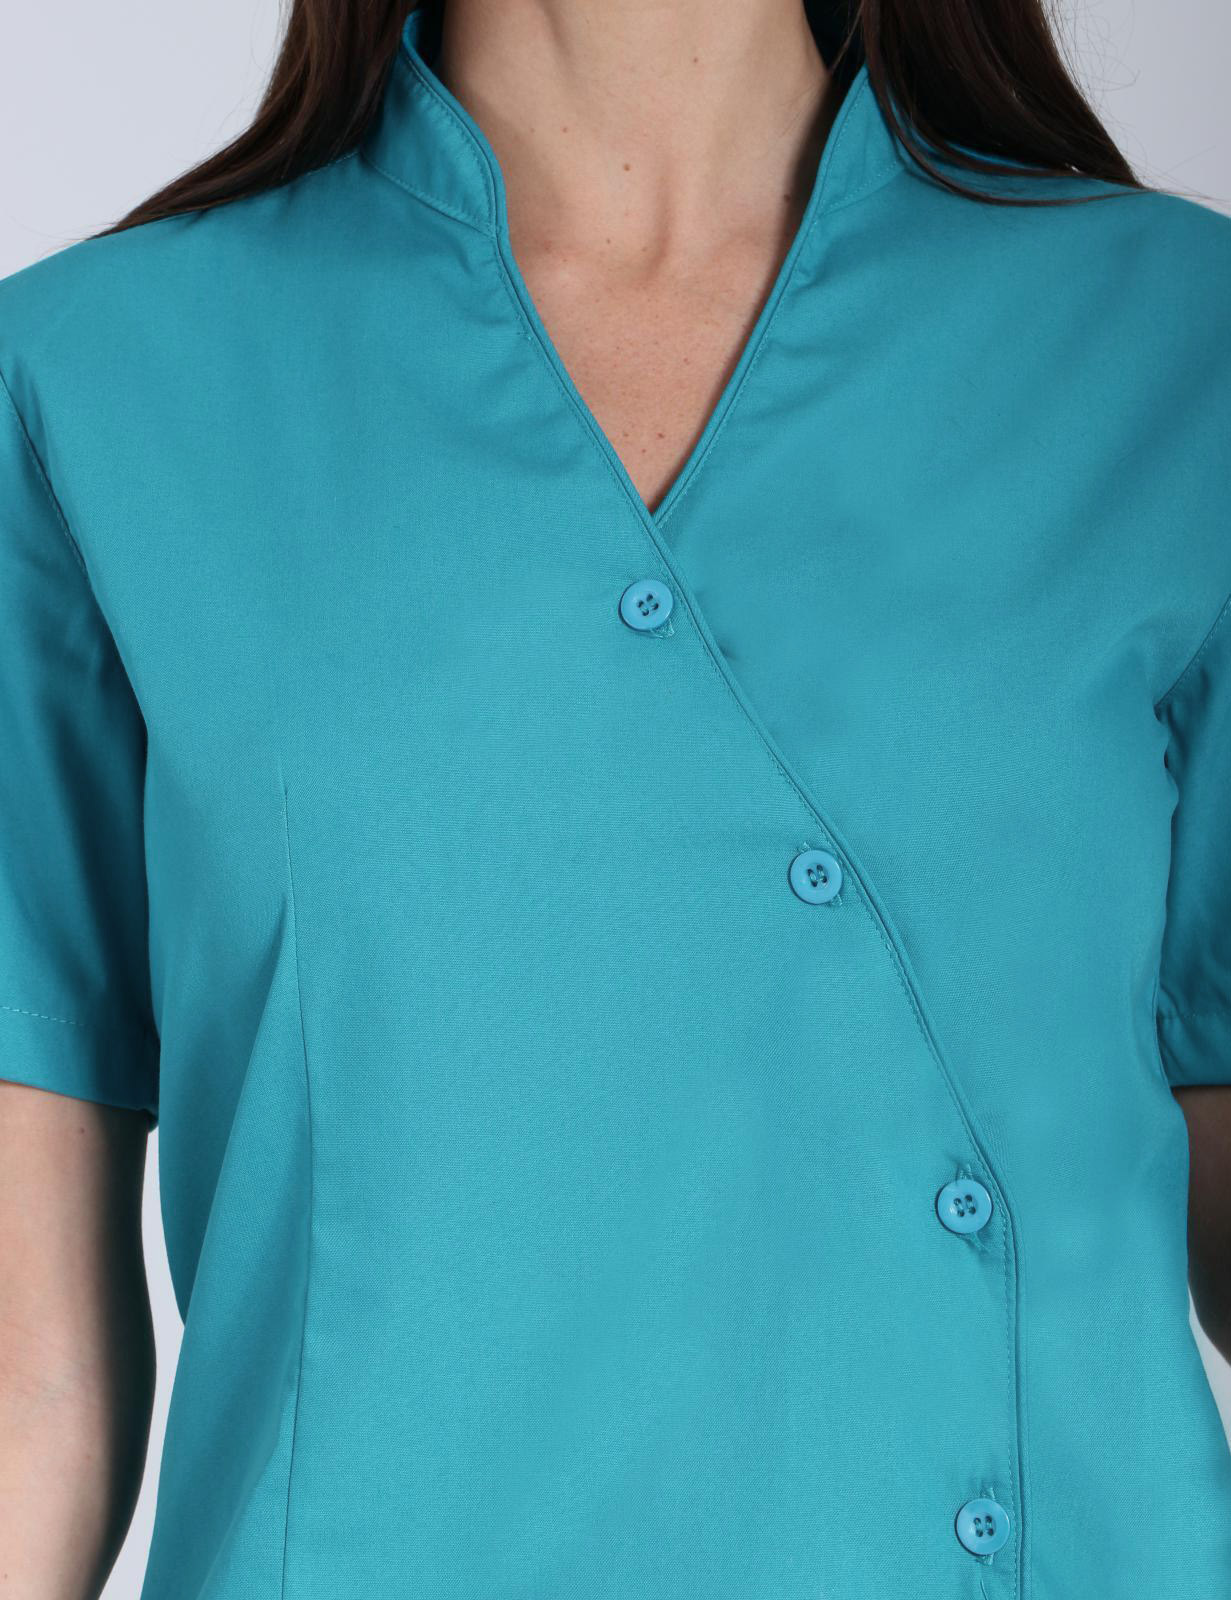 Jessie Style Tunic Top - Teal - 3X Large - 0